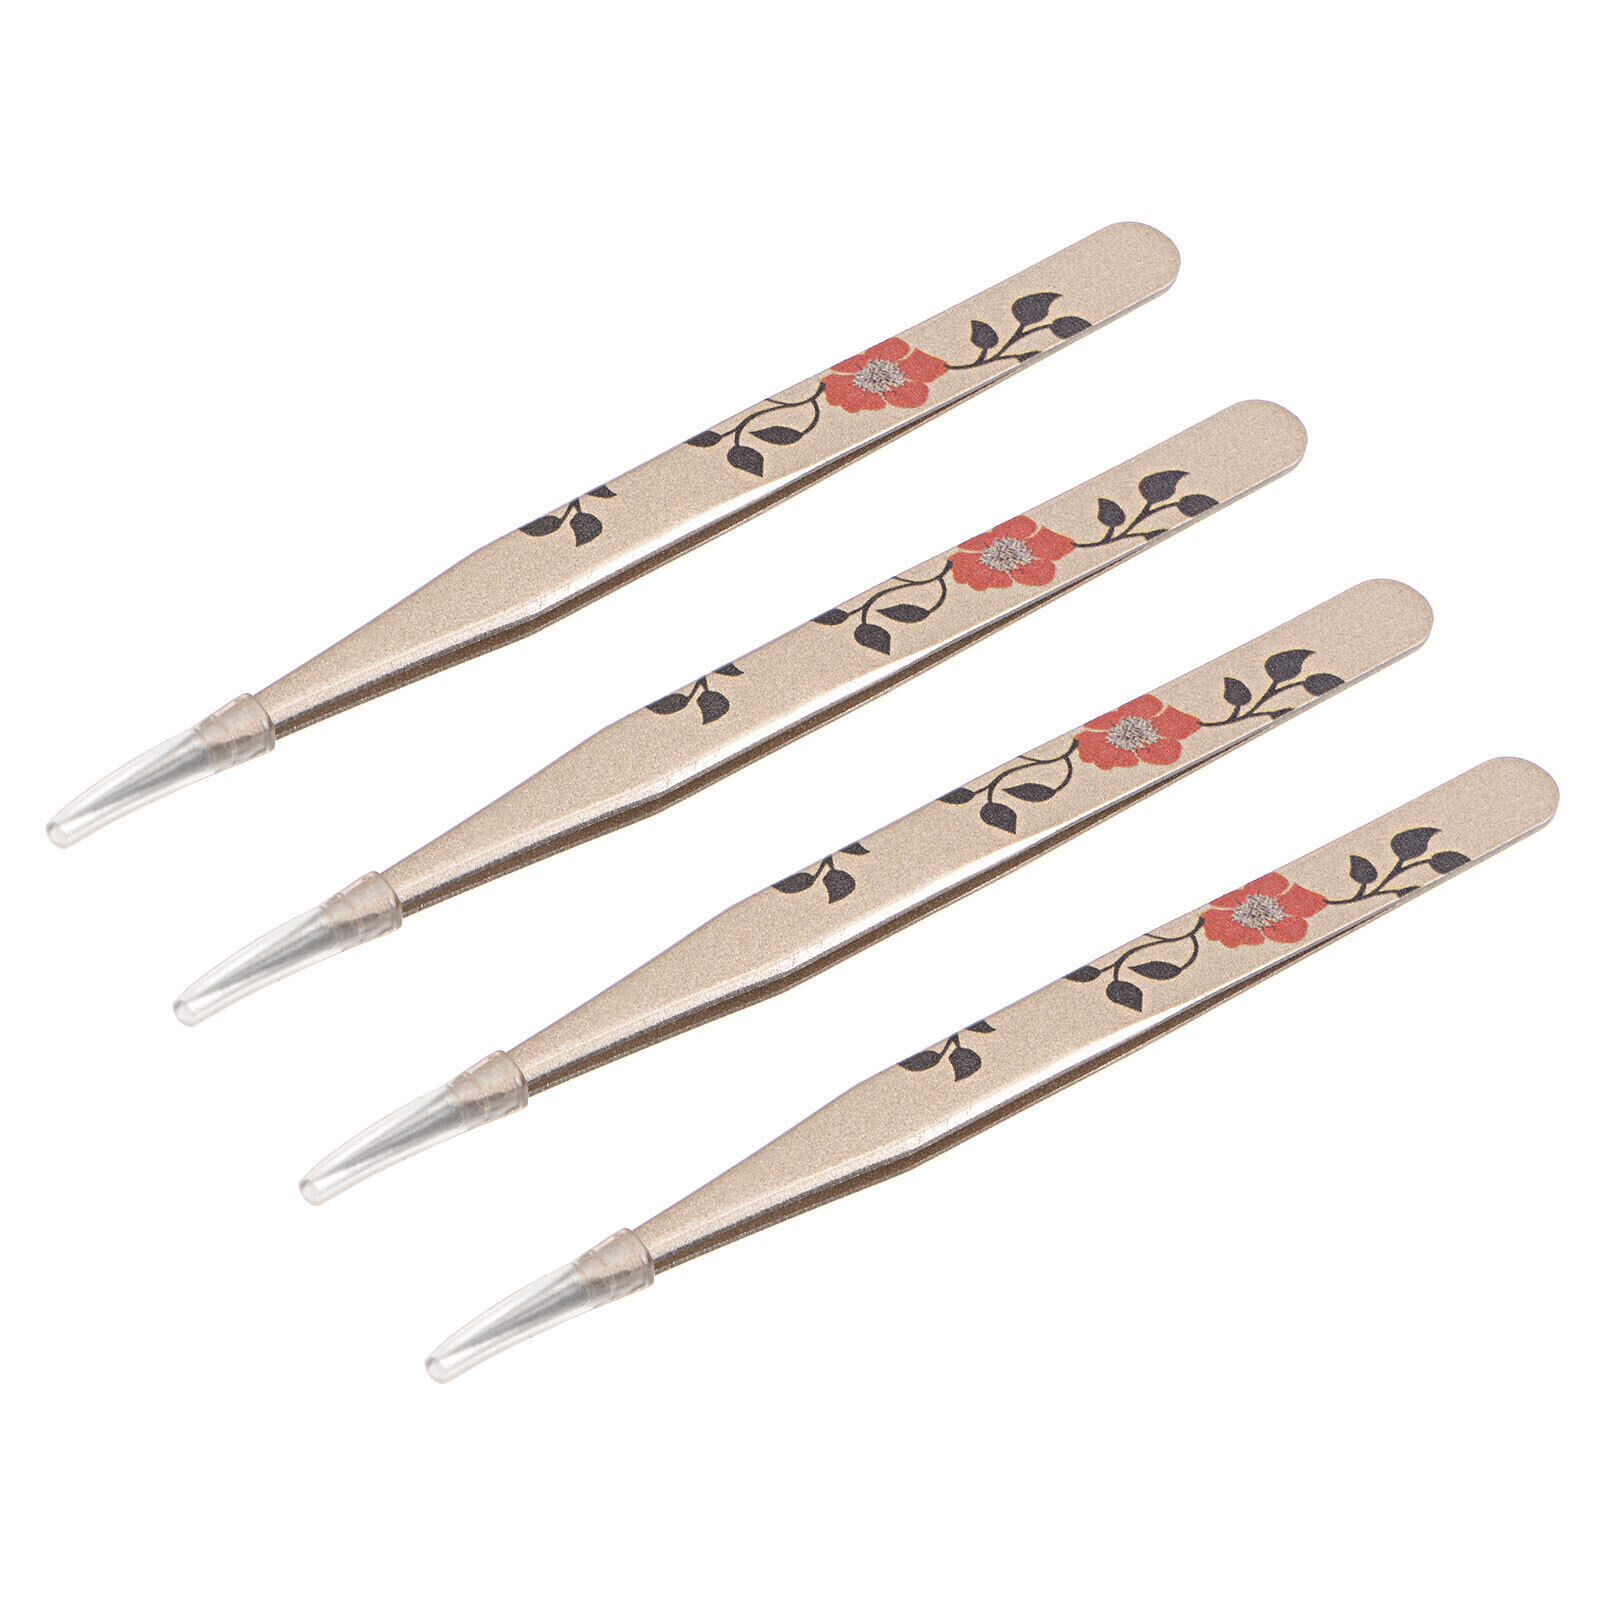 Precision Straight Tip Tweezer Stainless Steel Gold Brown with Flower Print 4Pcs